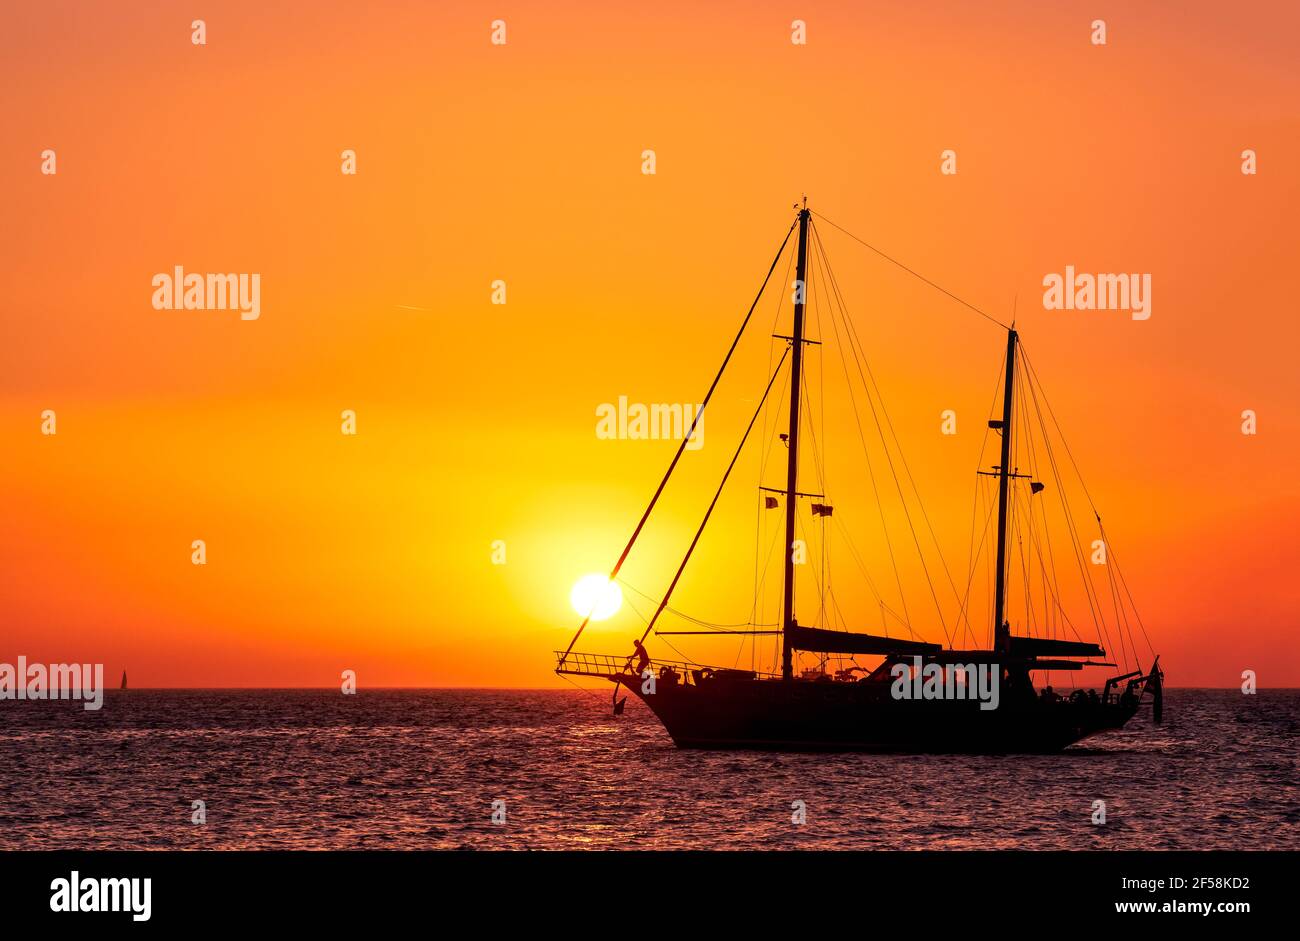 Silhouette of sailing boat with sails down against sun at sunset, sun glare on sea waters. Romantic seascape, sun touch headsail ropes. Stock Photo